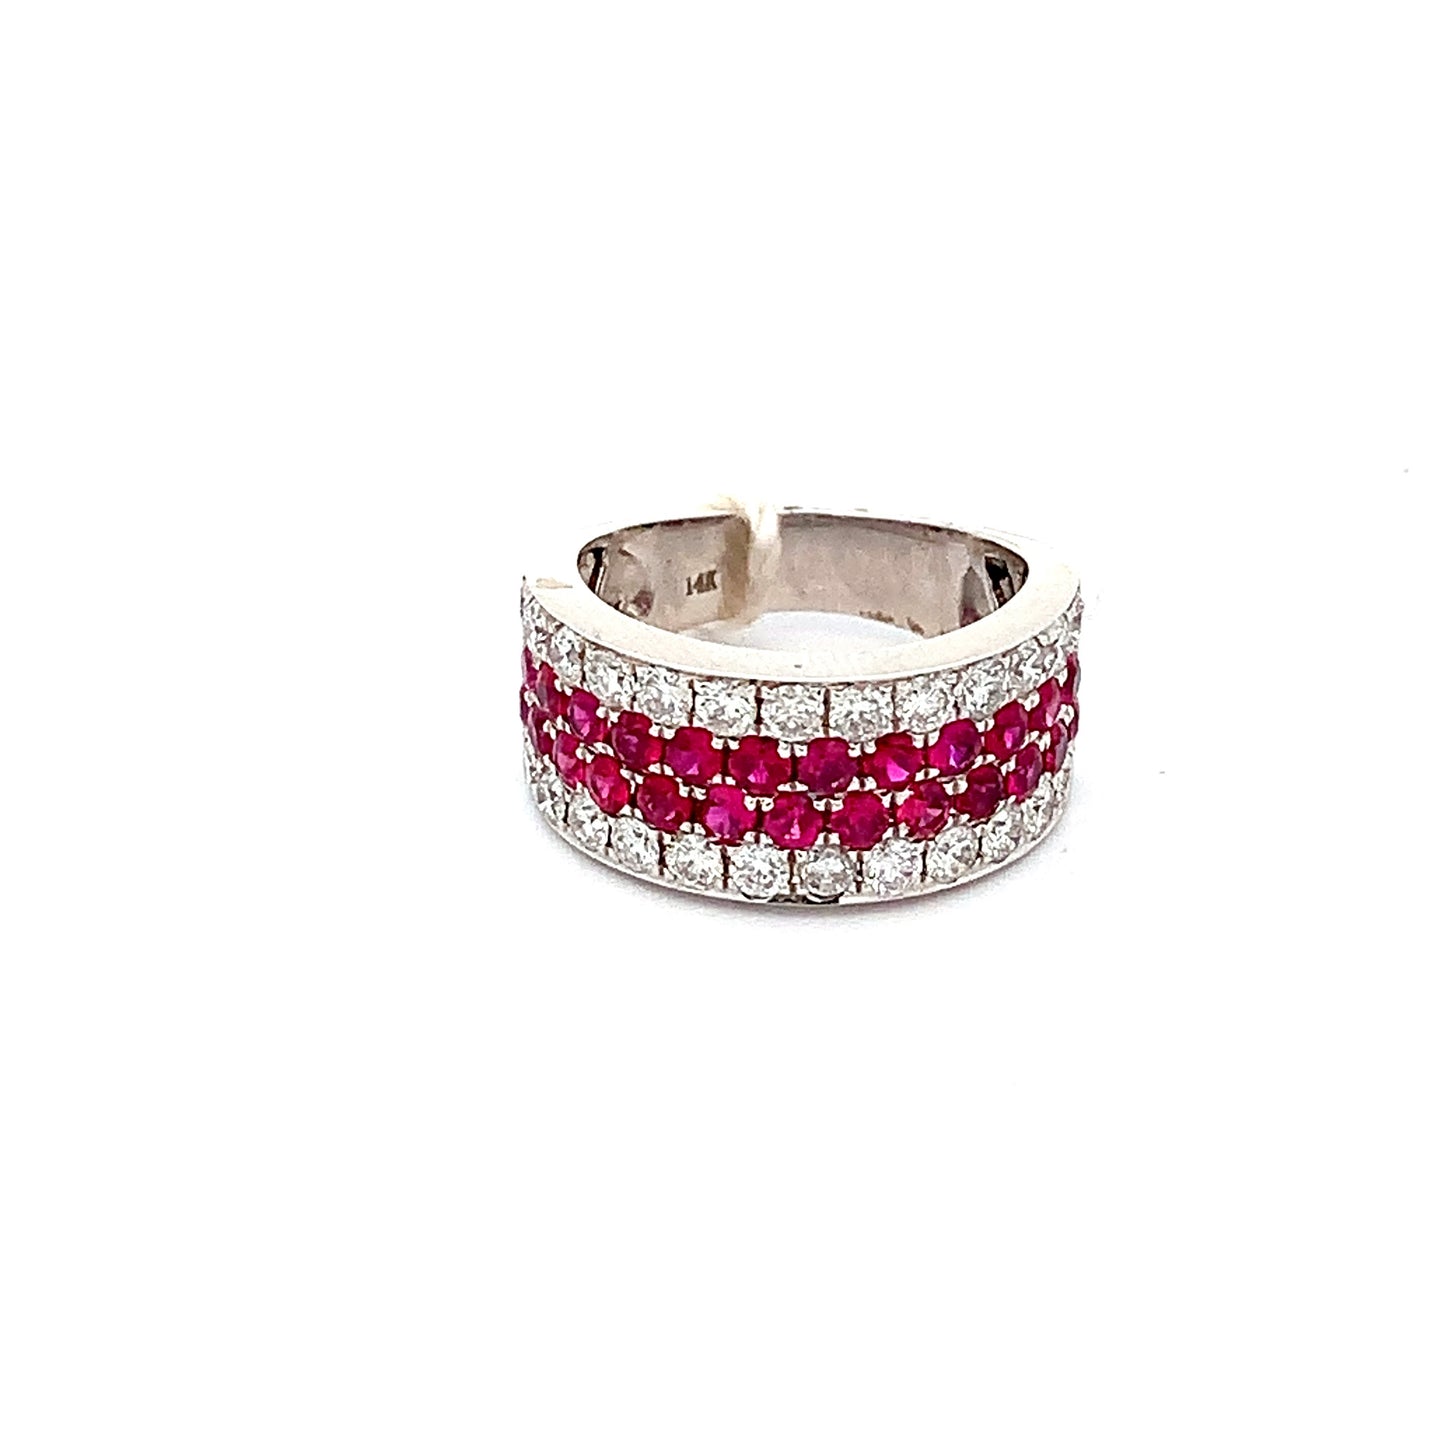 Ruby Ring R16384 - Royal Gems and Jewelry